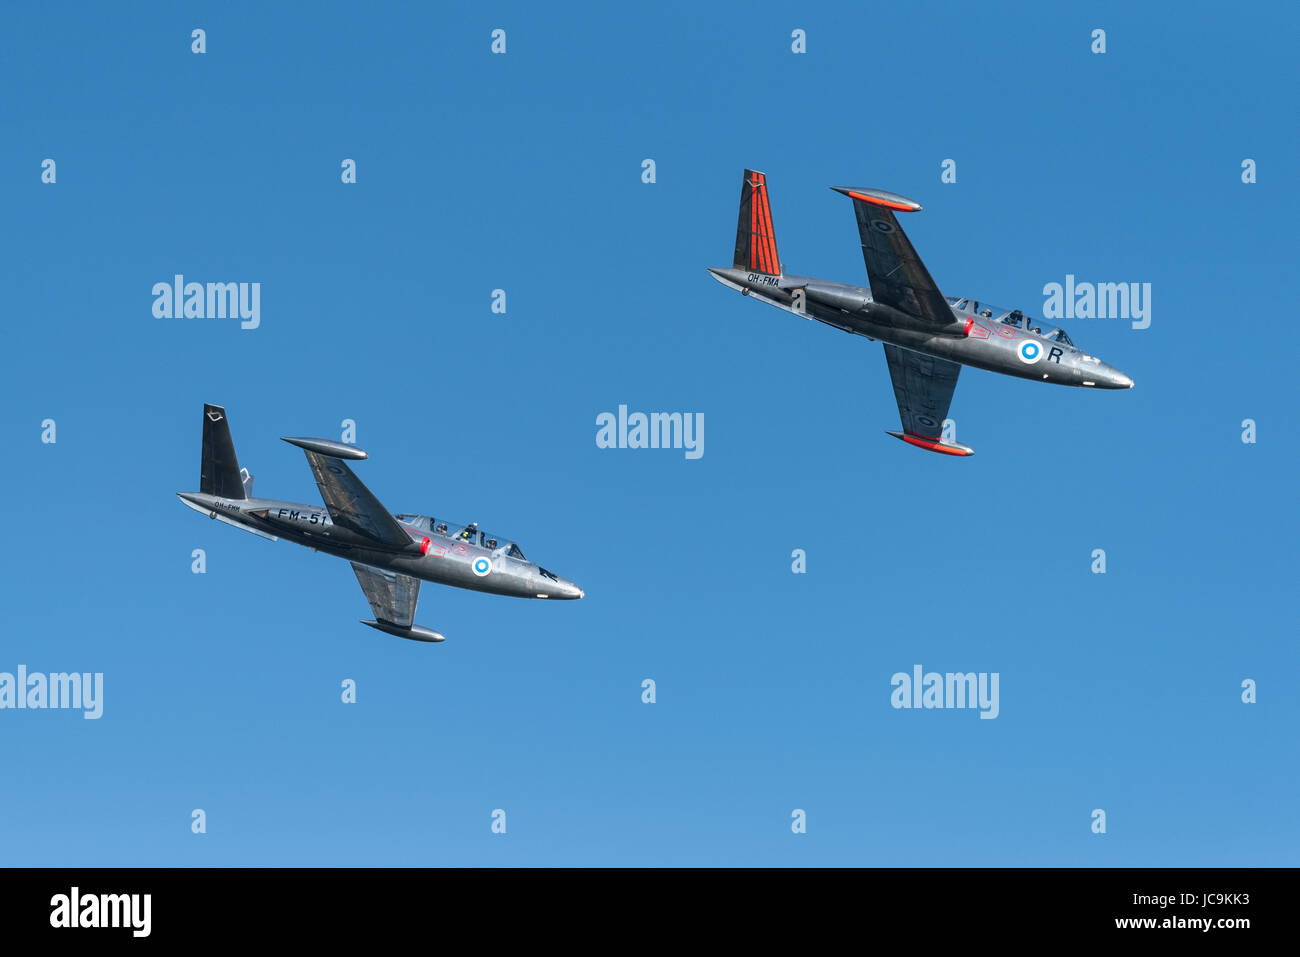 Helsinki, Finland - 9 June 2017: Two Silver Jets Aerobatic Team Fouga CM 170 Magister jets flying at the Kaivopuisto Air Show in Helsinki, Finland. Stock Photo